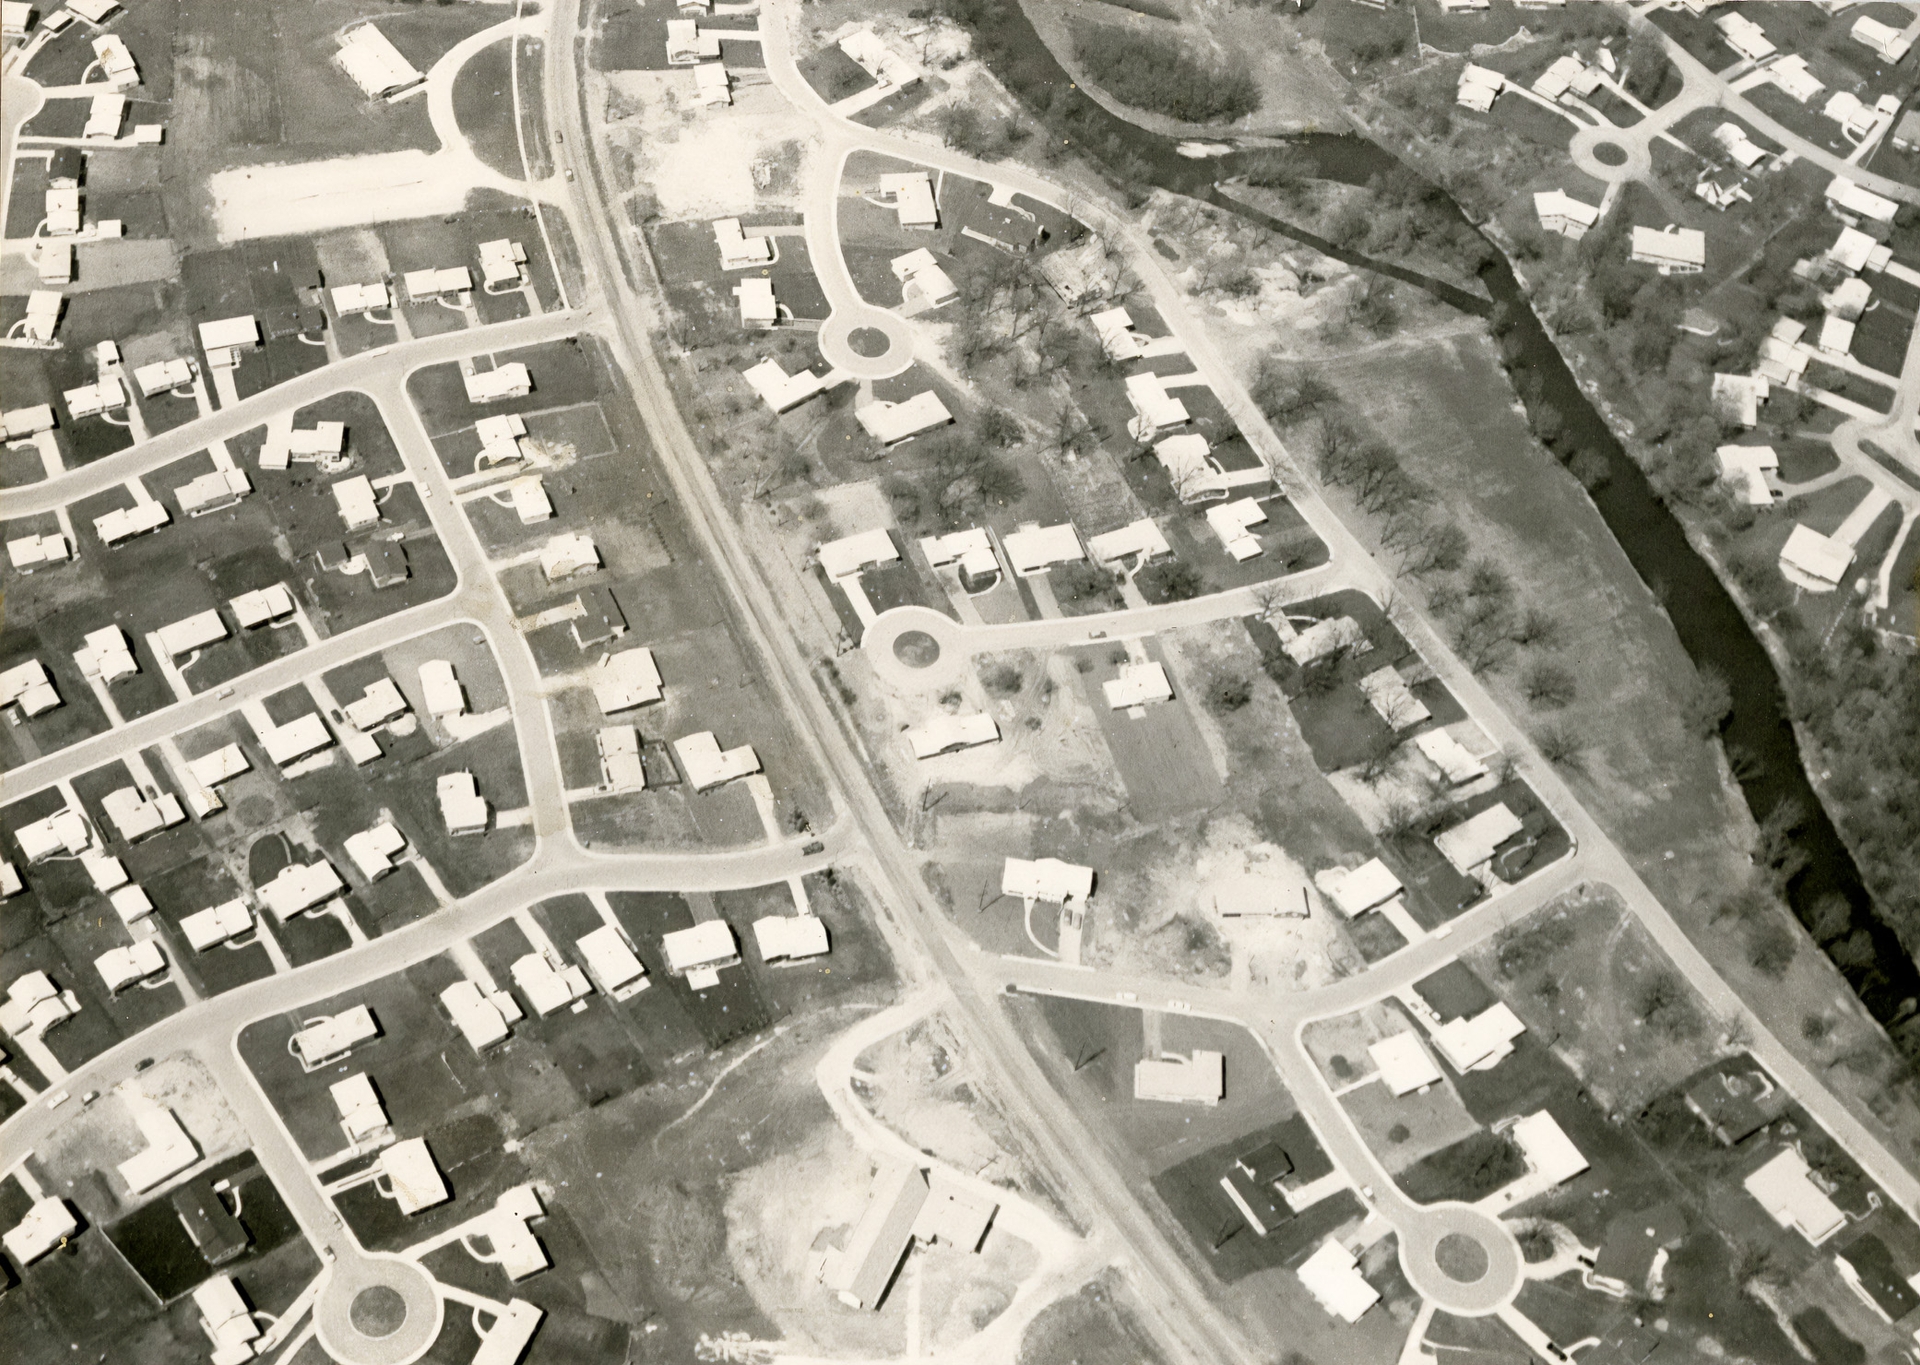 Aerial view of Moser Development suburbs in Naperville, Illinois.